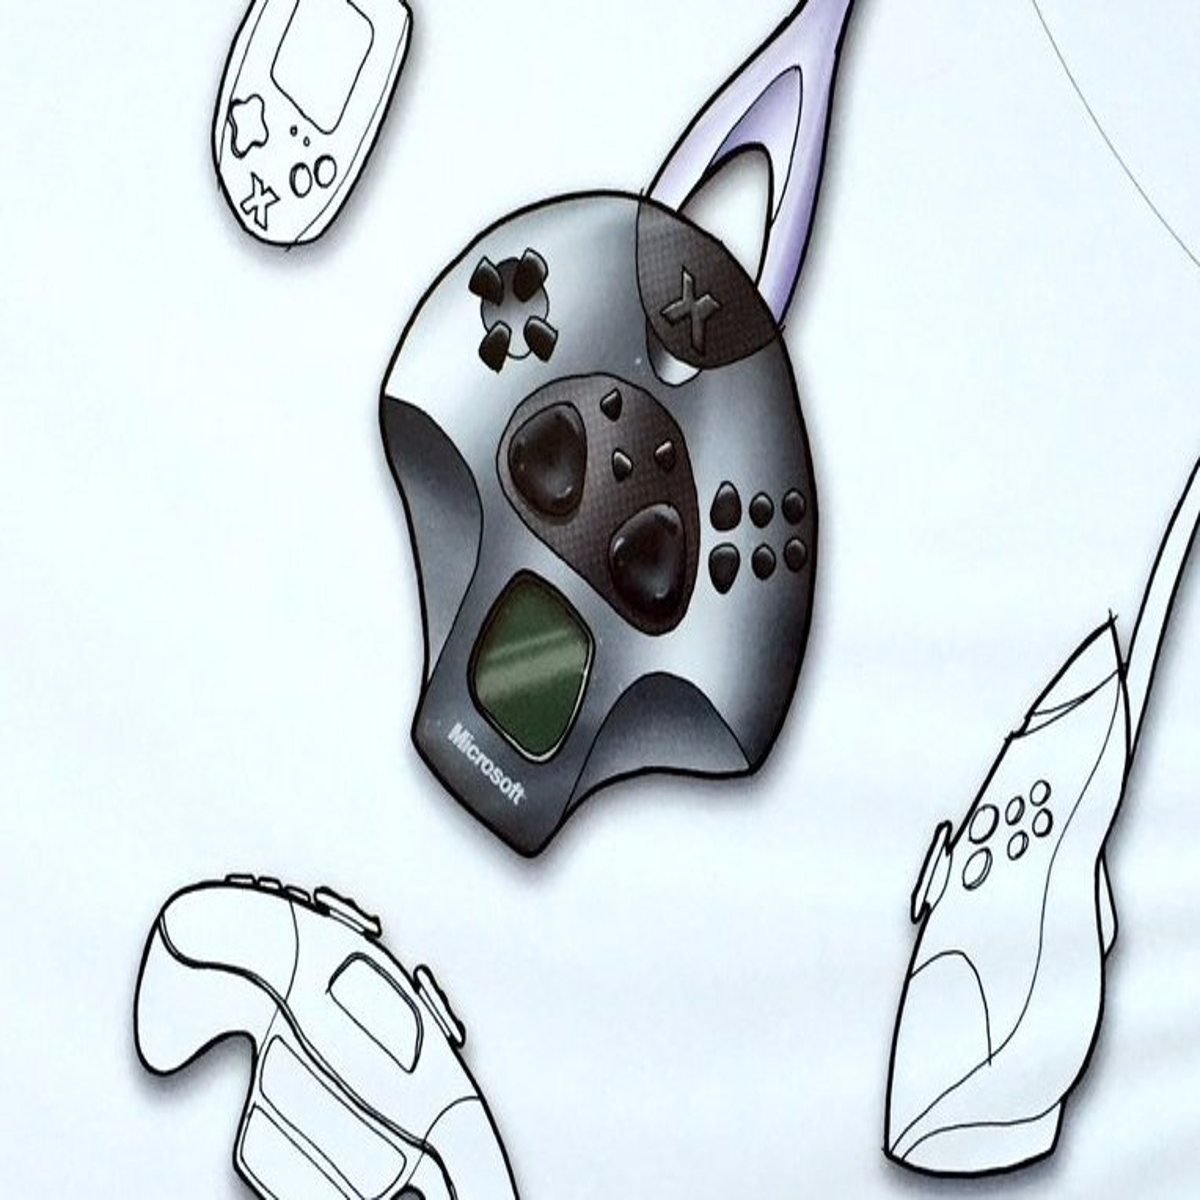 Get this new version of the original Xbox controller for an all